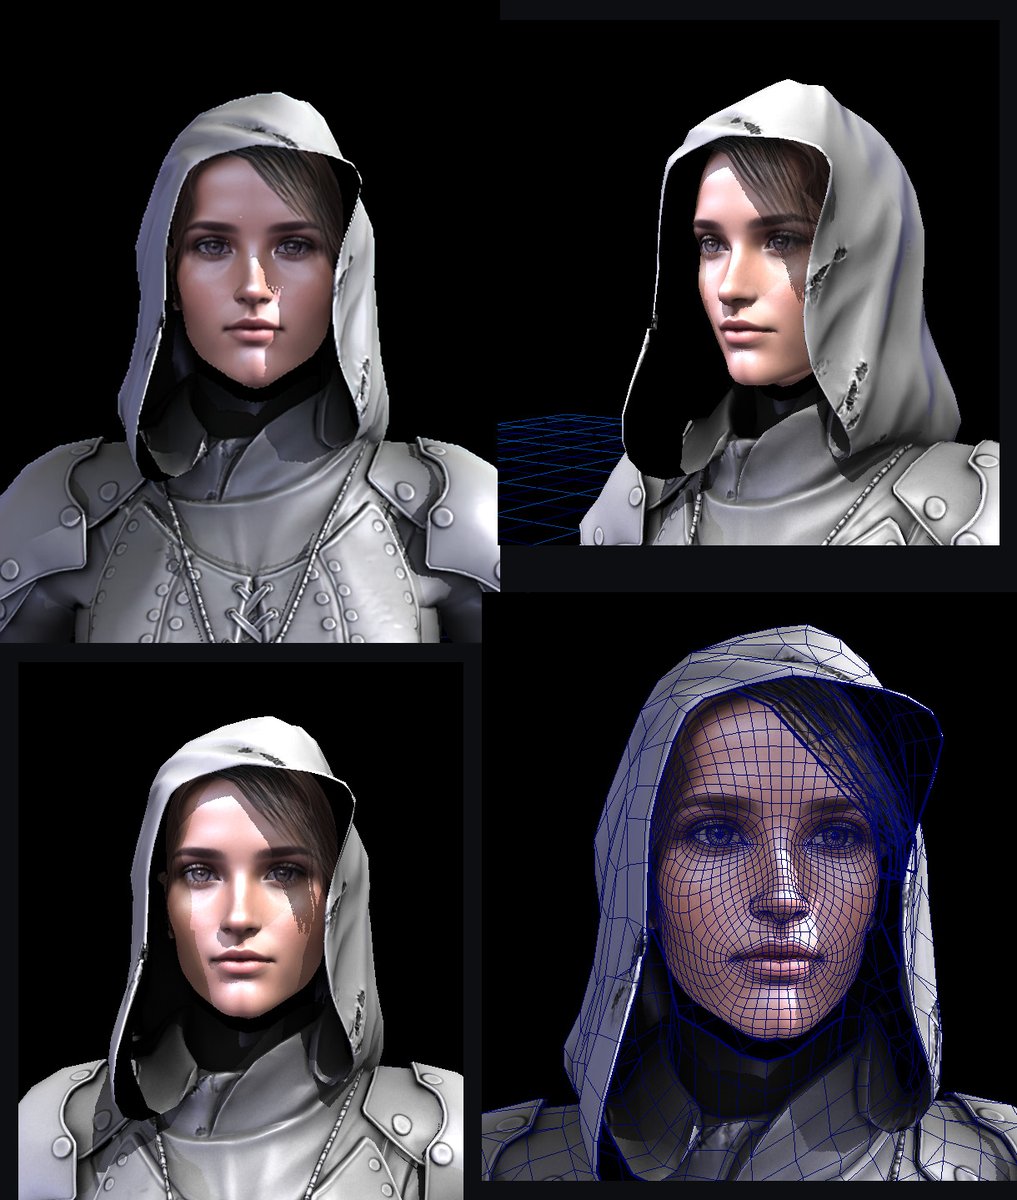 A face test for one of the female inquisitors for @TheFabled 
(in-game version)

#theFabled #fantasy #game #rpg #darkfantasy #inquisitor #web3 #characterart #FinalFantasy #fun #model #face